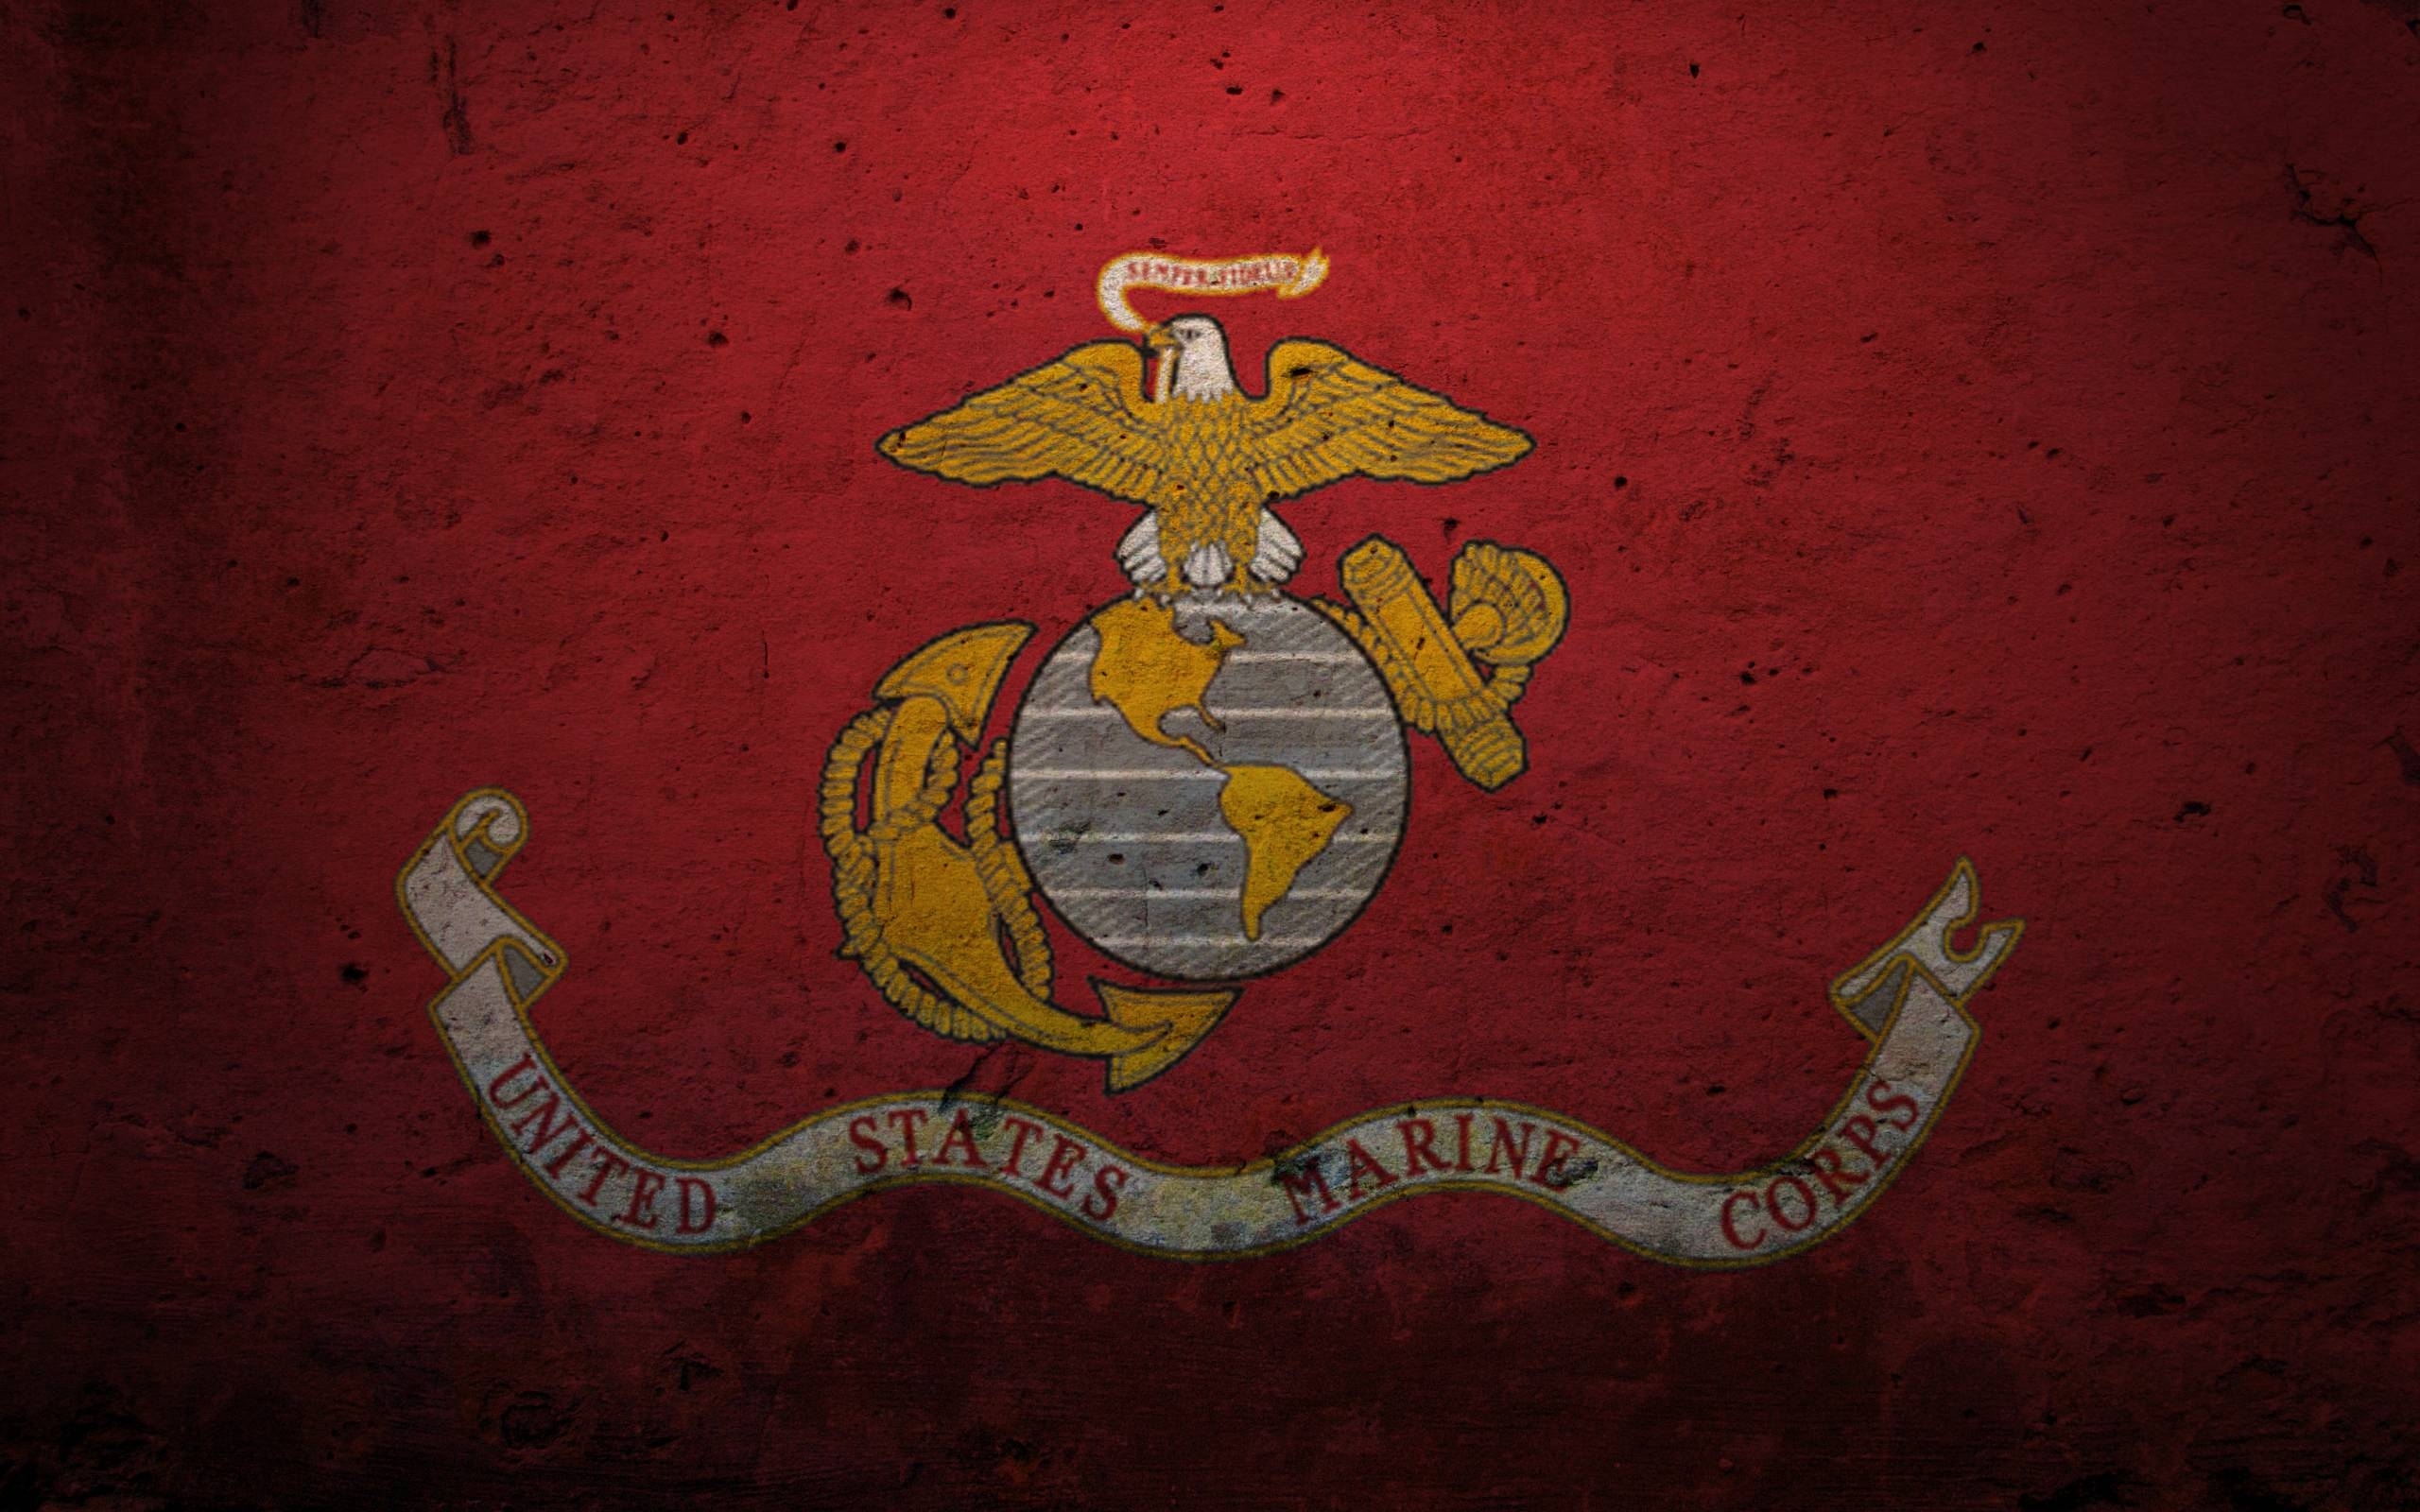 10 Best Marine Corps Hd Wallpaper FULL HD 1920×1080 For PC Background